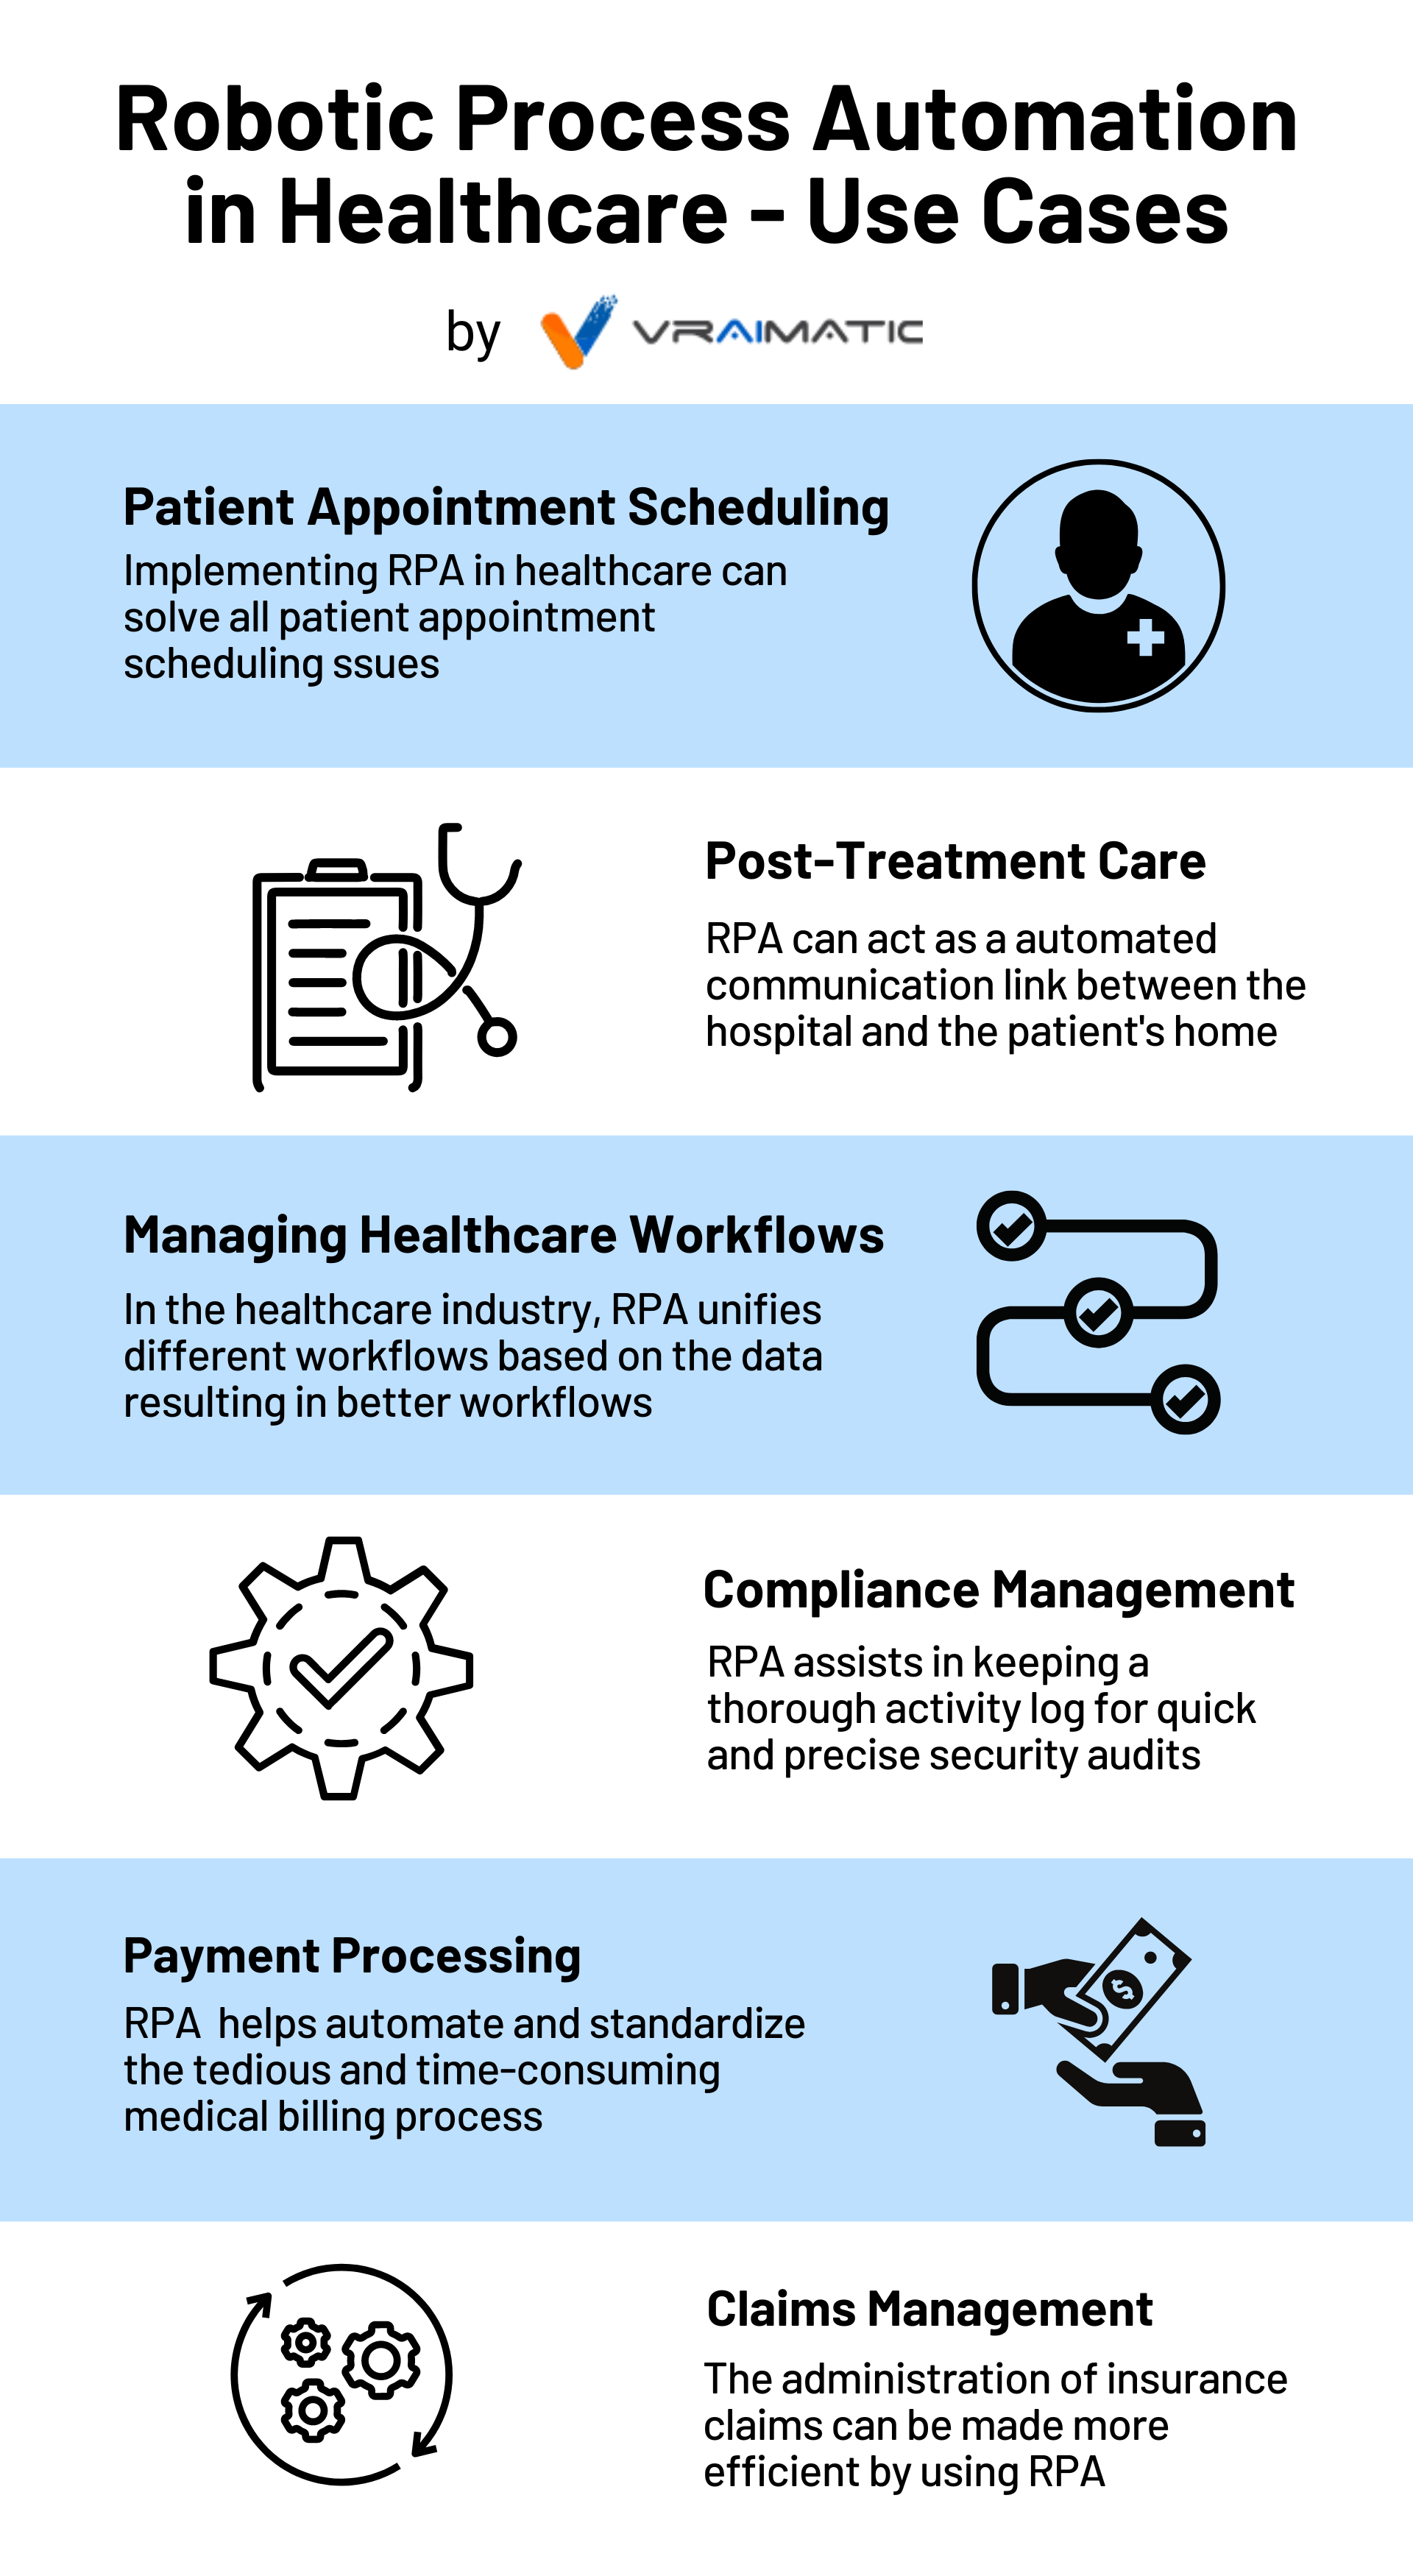  Use Cases of RPA in Healthcare